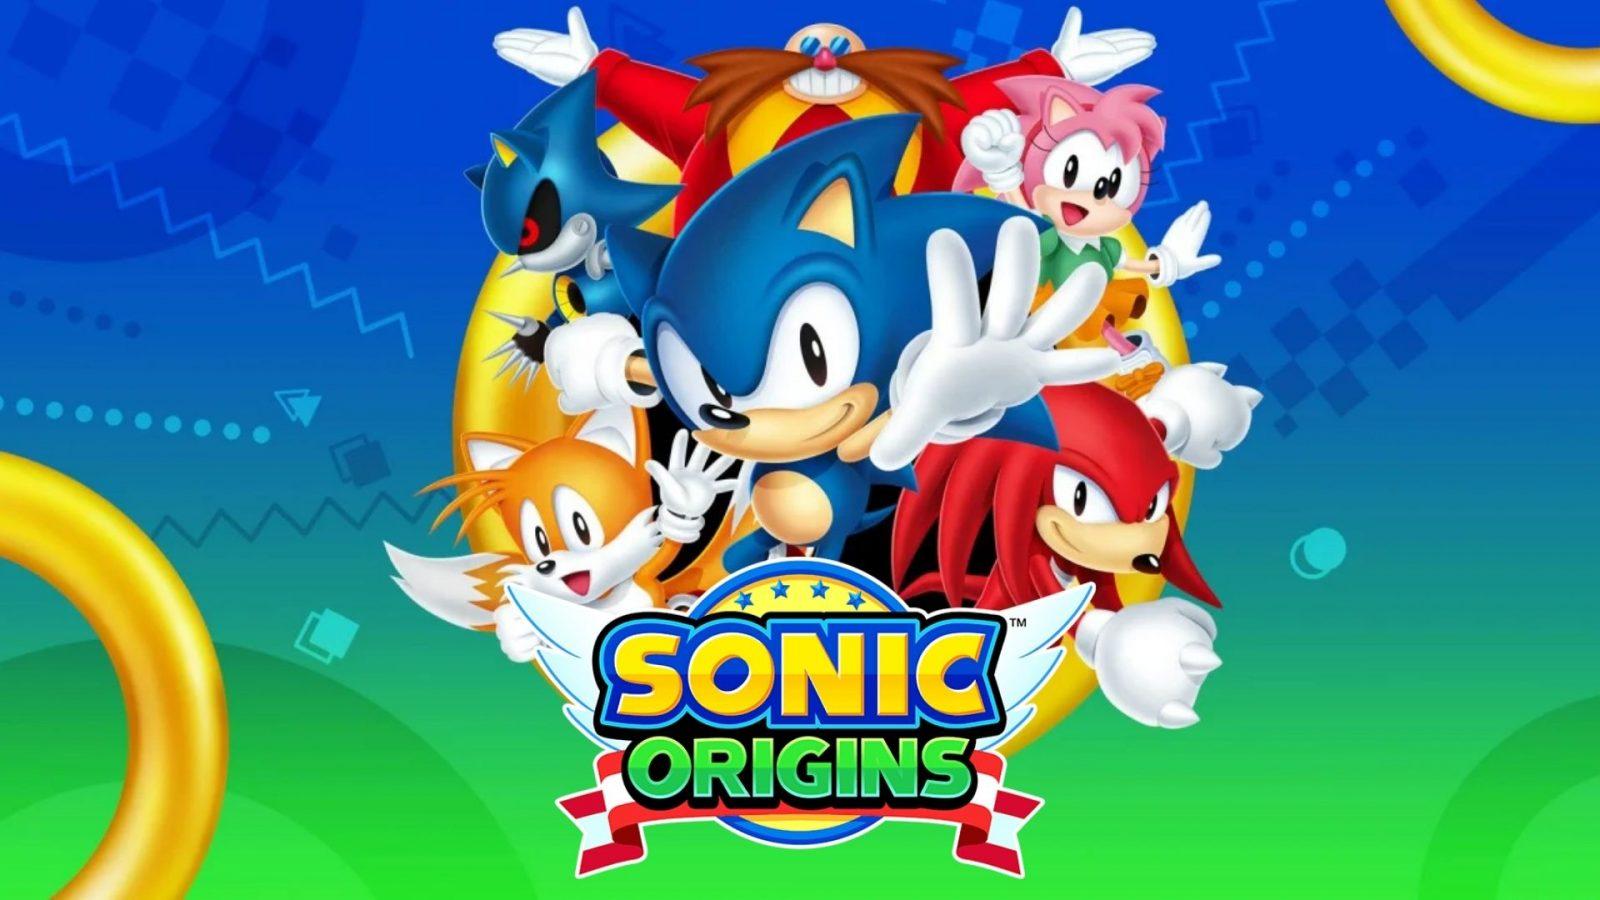 Take A Look At The New Modes And Content Coming To Sonic Origins